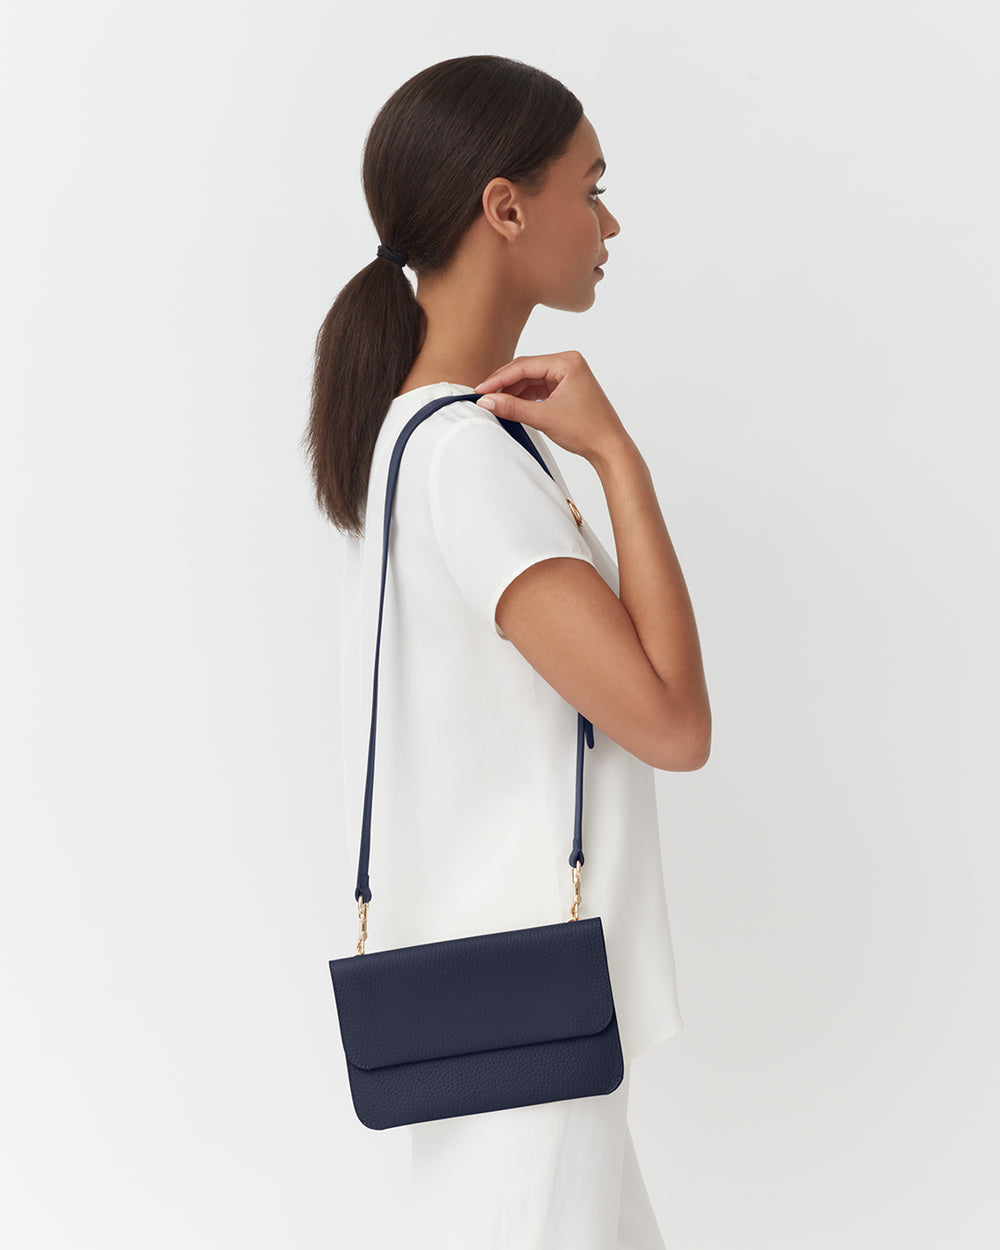 Woman with purse over shoulder looking to the side